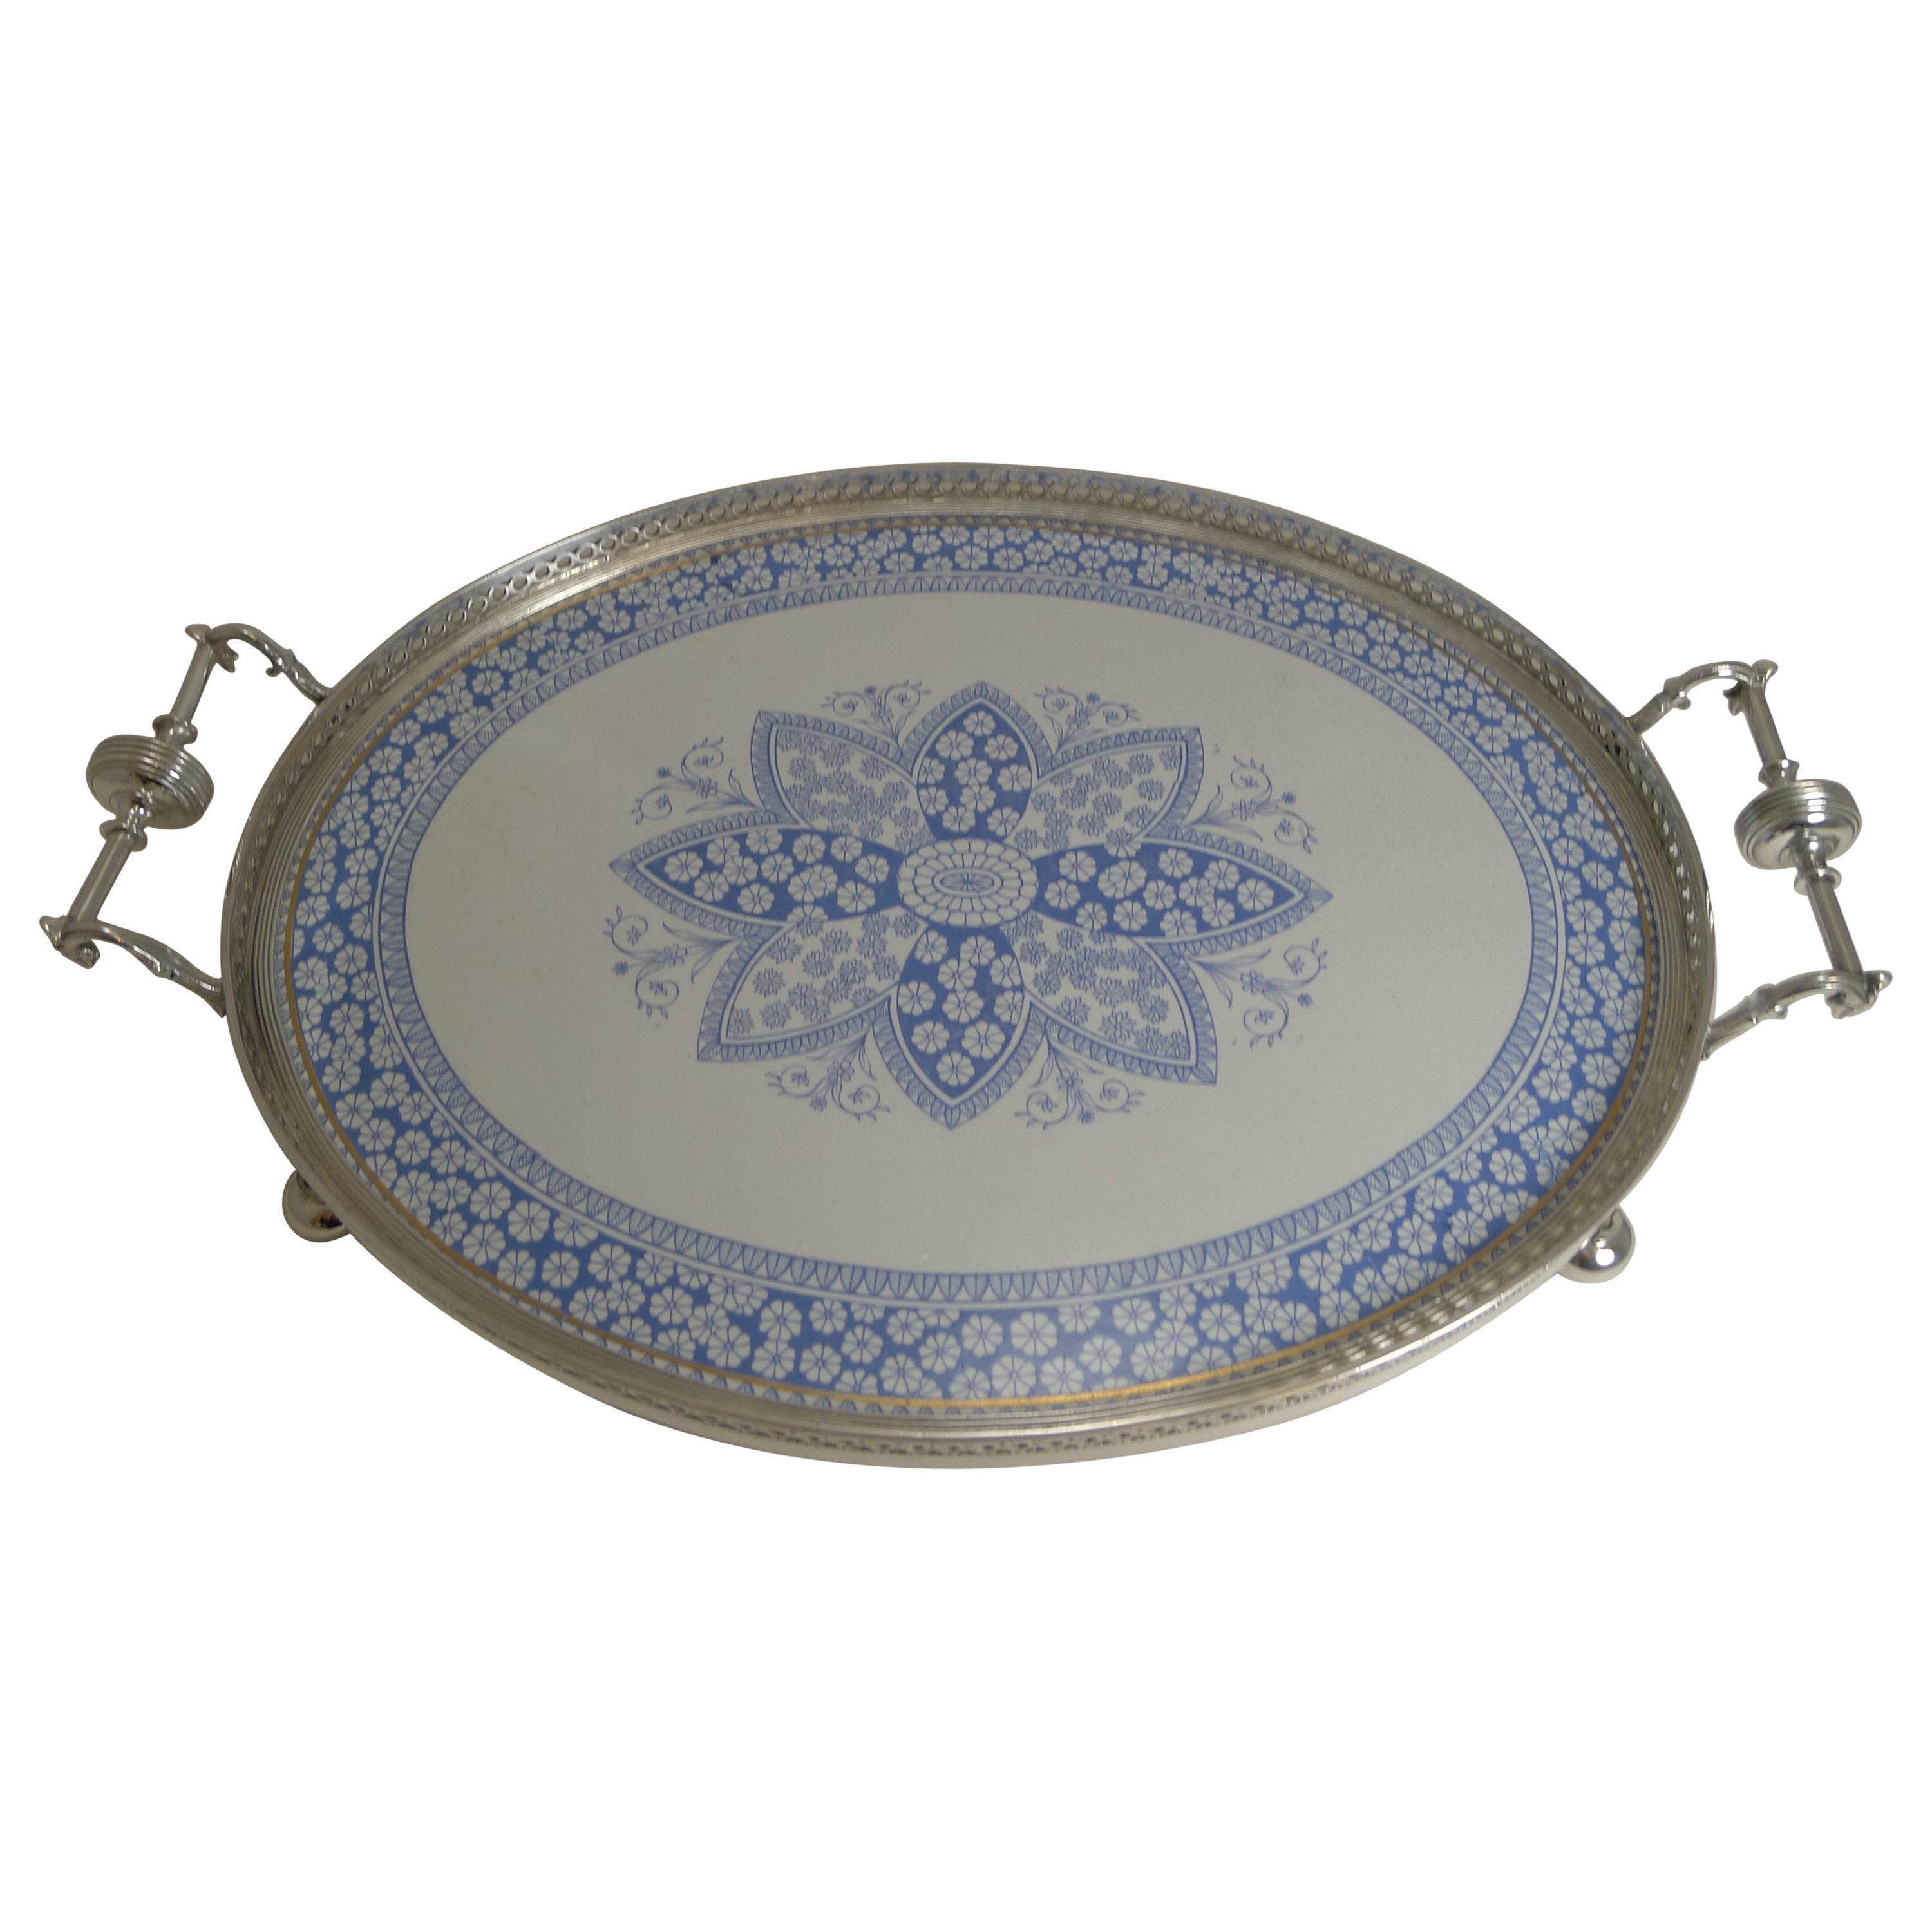 Antique English Silver Plate and Ceramic Blue and White Serving Tray, circa 1880